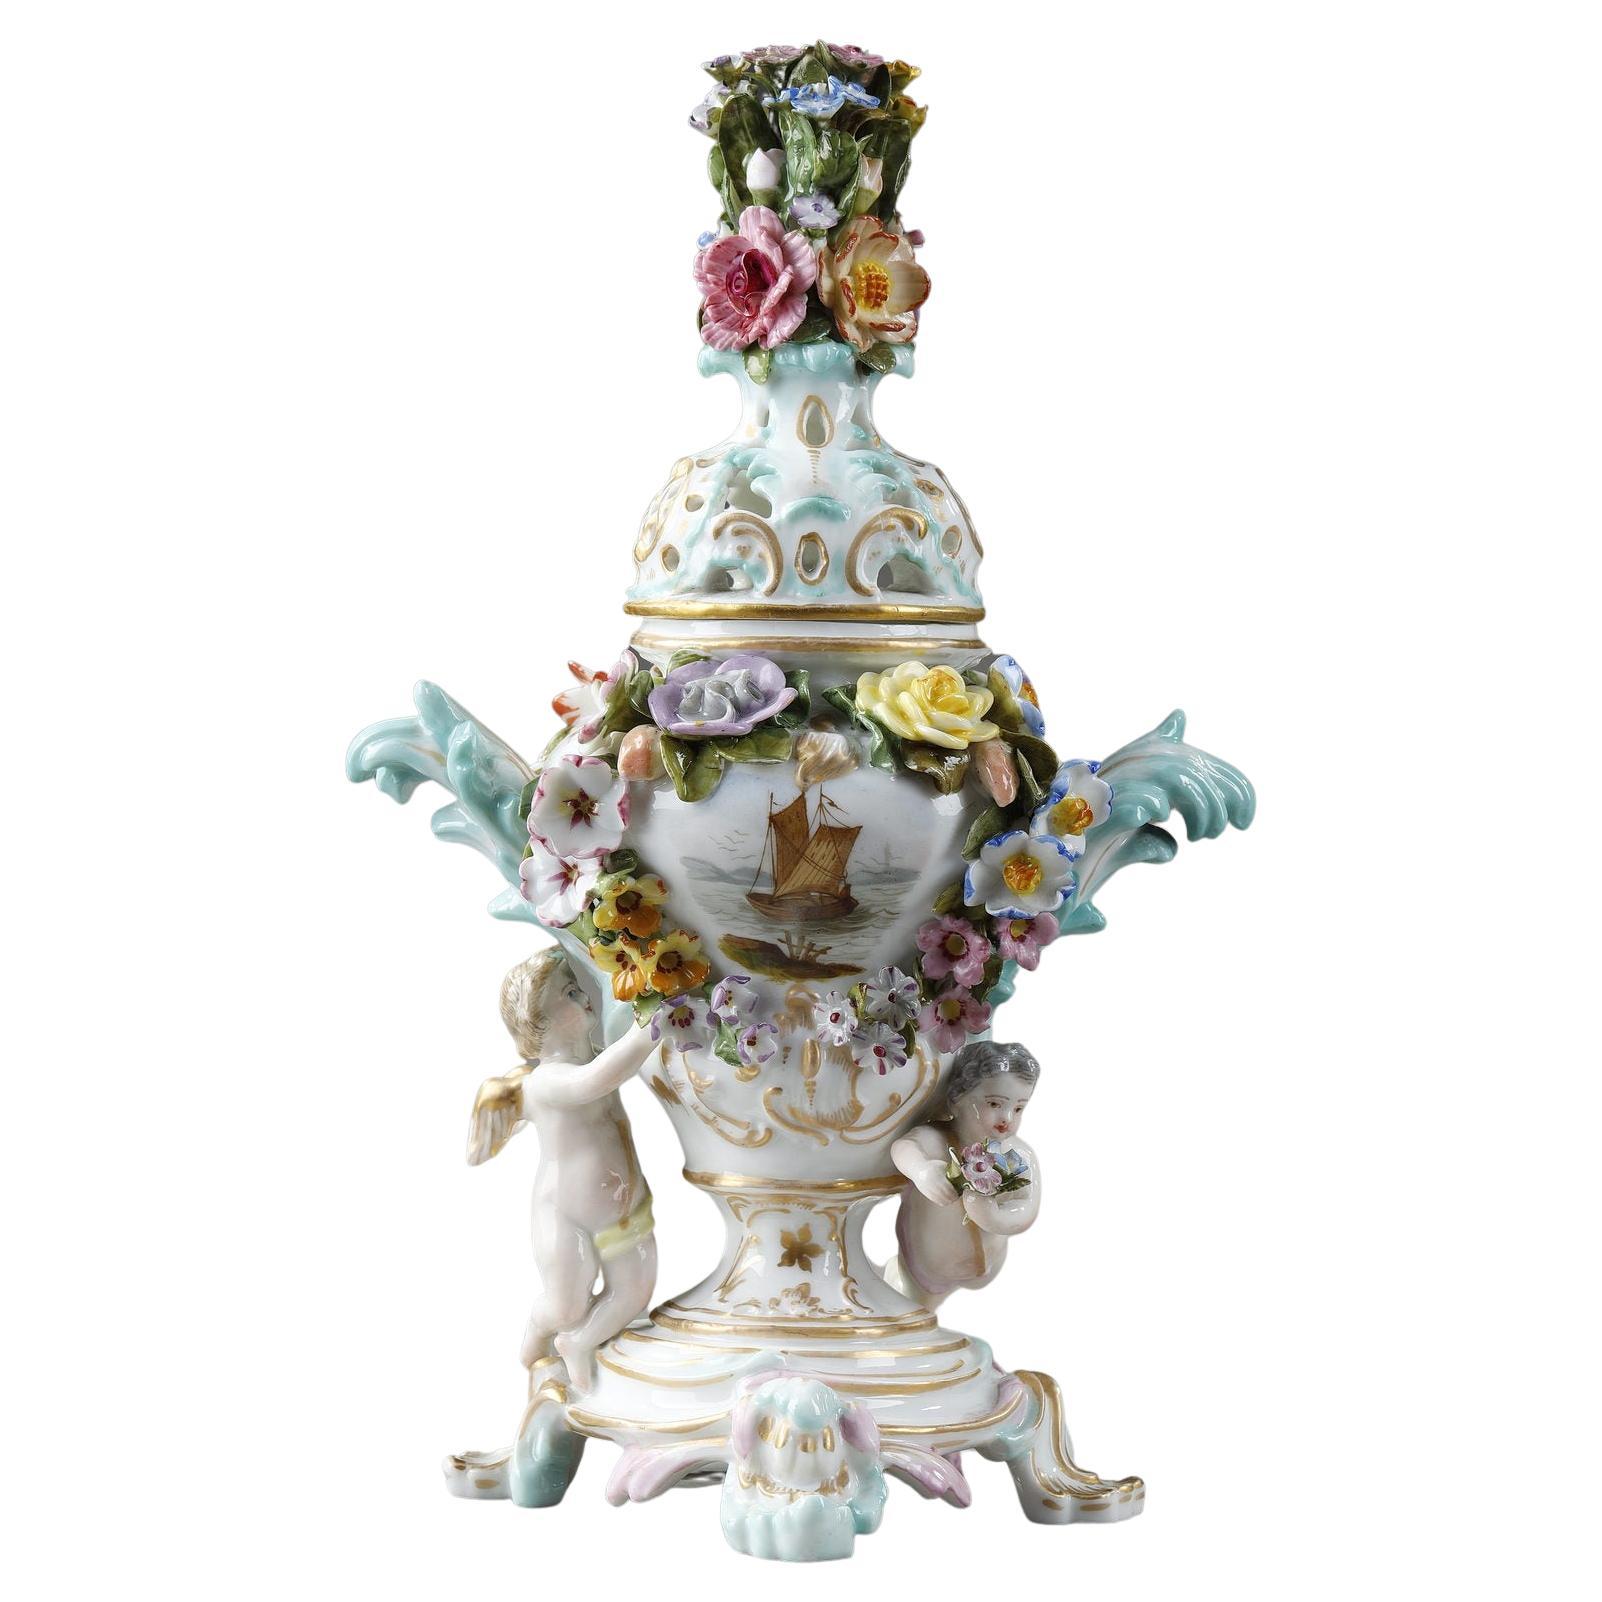 Perfume burner in polychrome porcelain from the Meissen manufacture